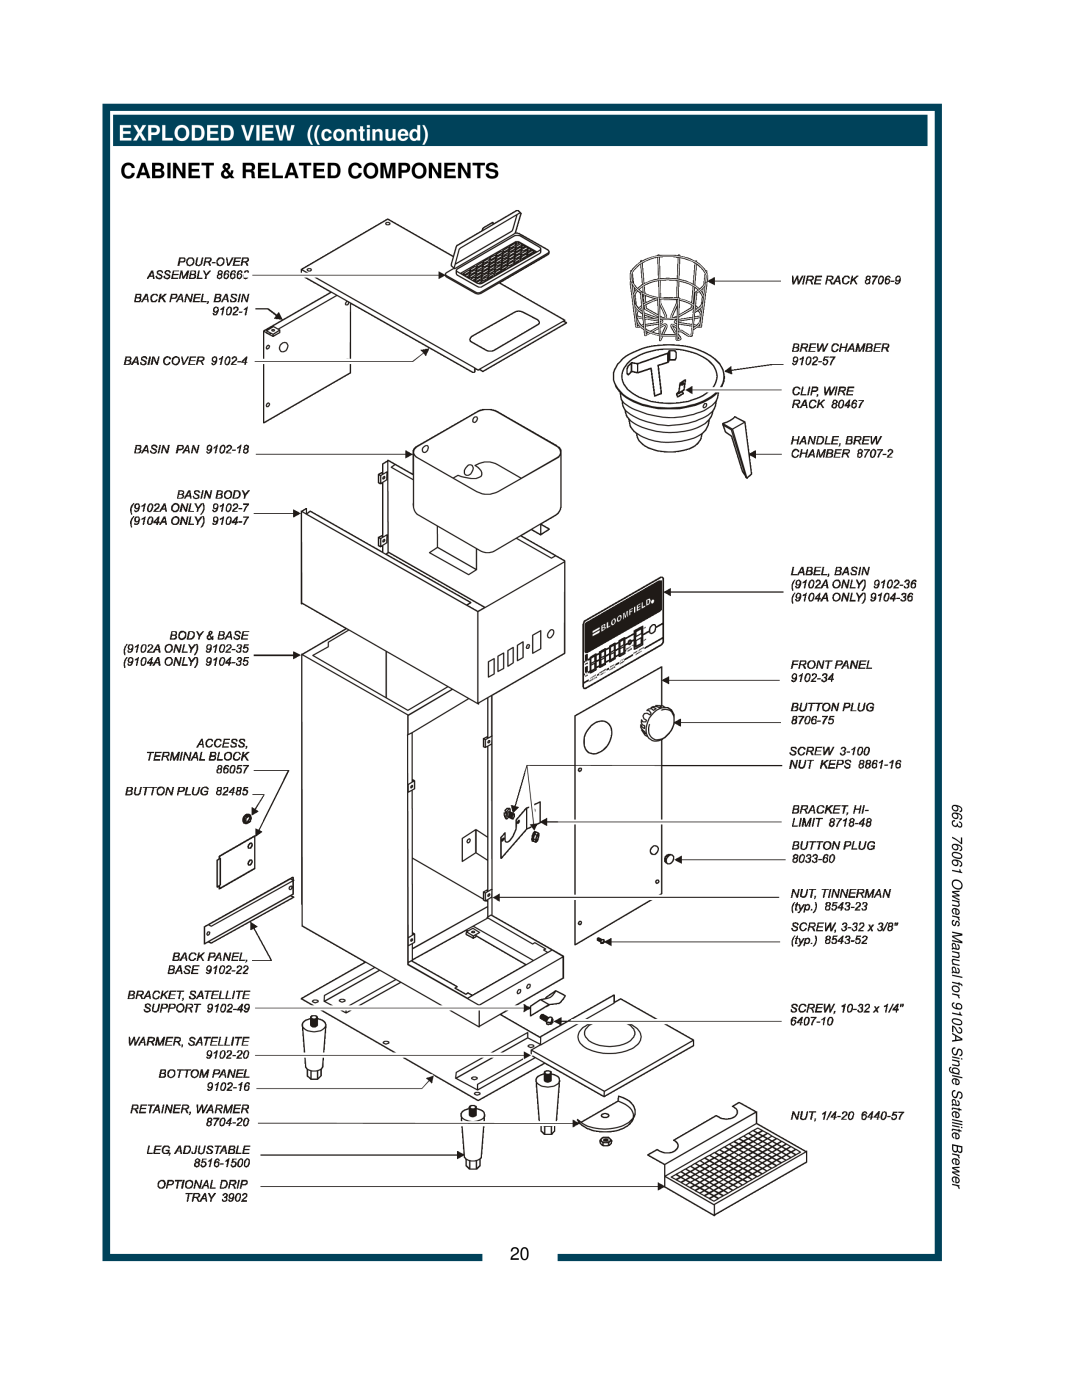 Bloomfield EXPLODED VIEW continued, Cabinet & Related Components, Owners Manual for 9102A Single Satellite Brewer 